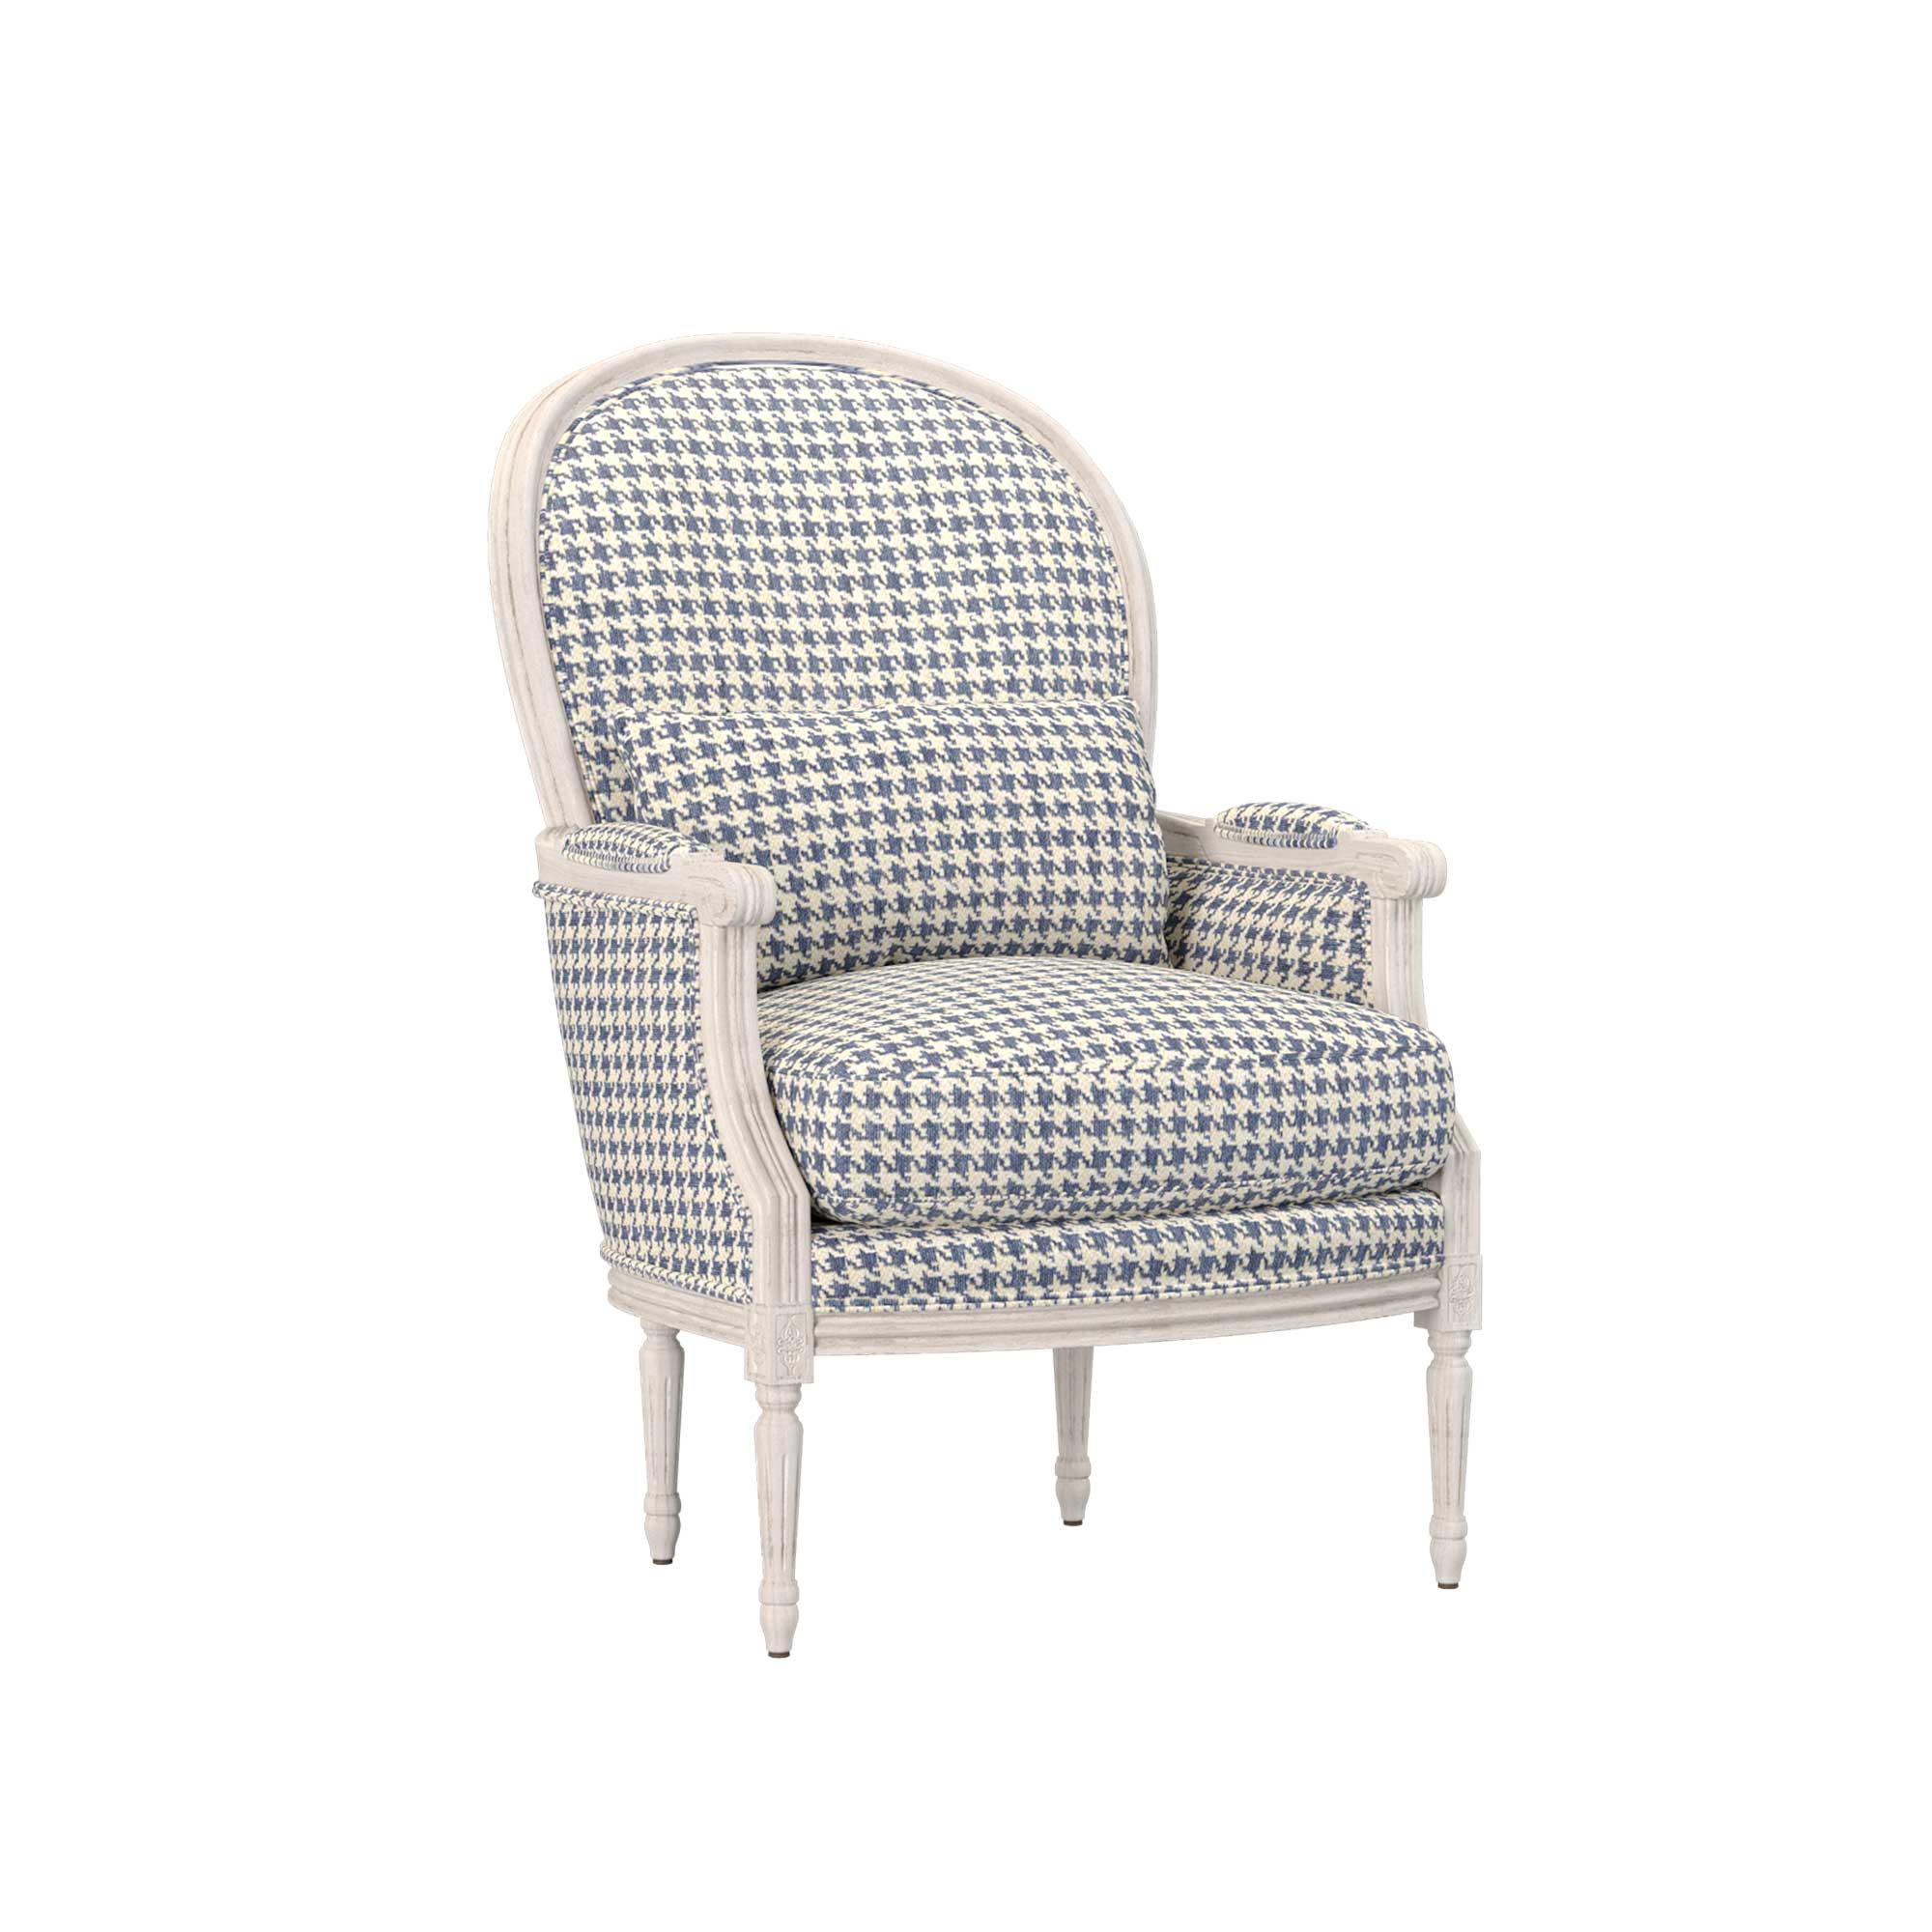 Adele Lounge Chair in Blue Houndstooth